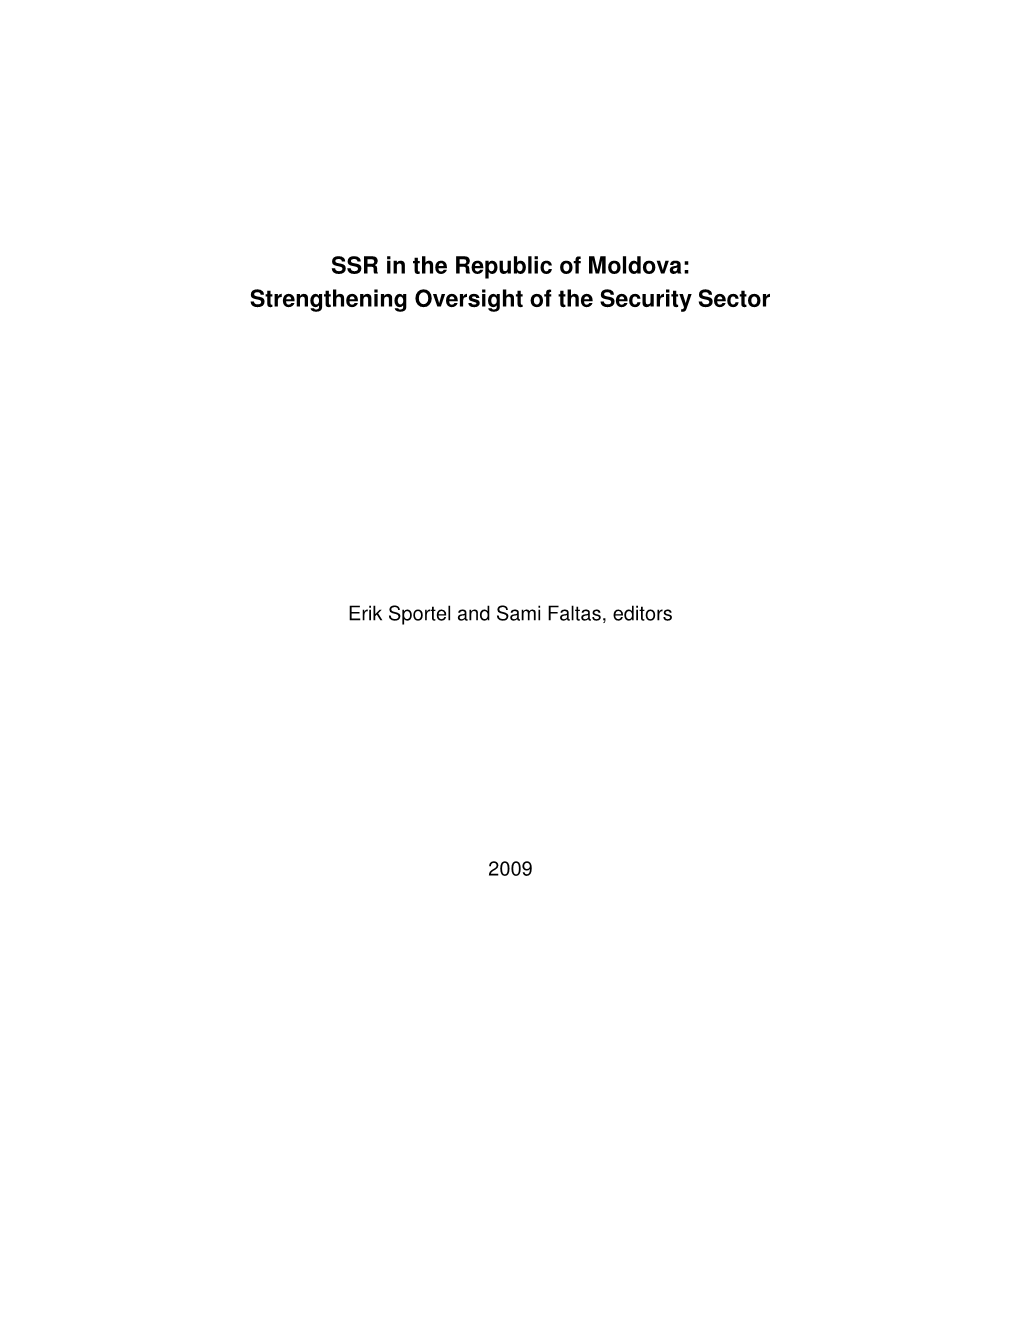 SSR in the Republic of Moldova: Strengthening Oversight of the Security Sector